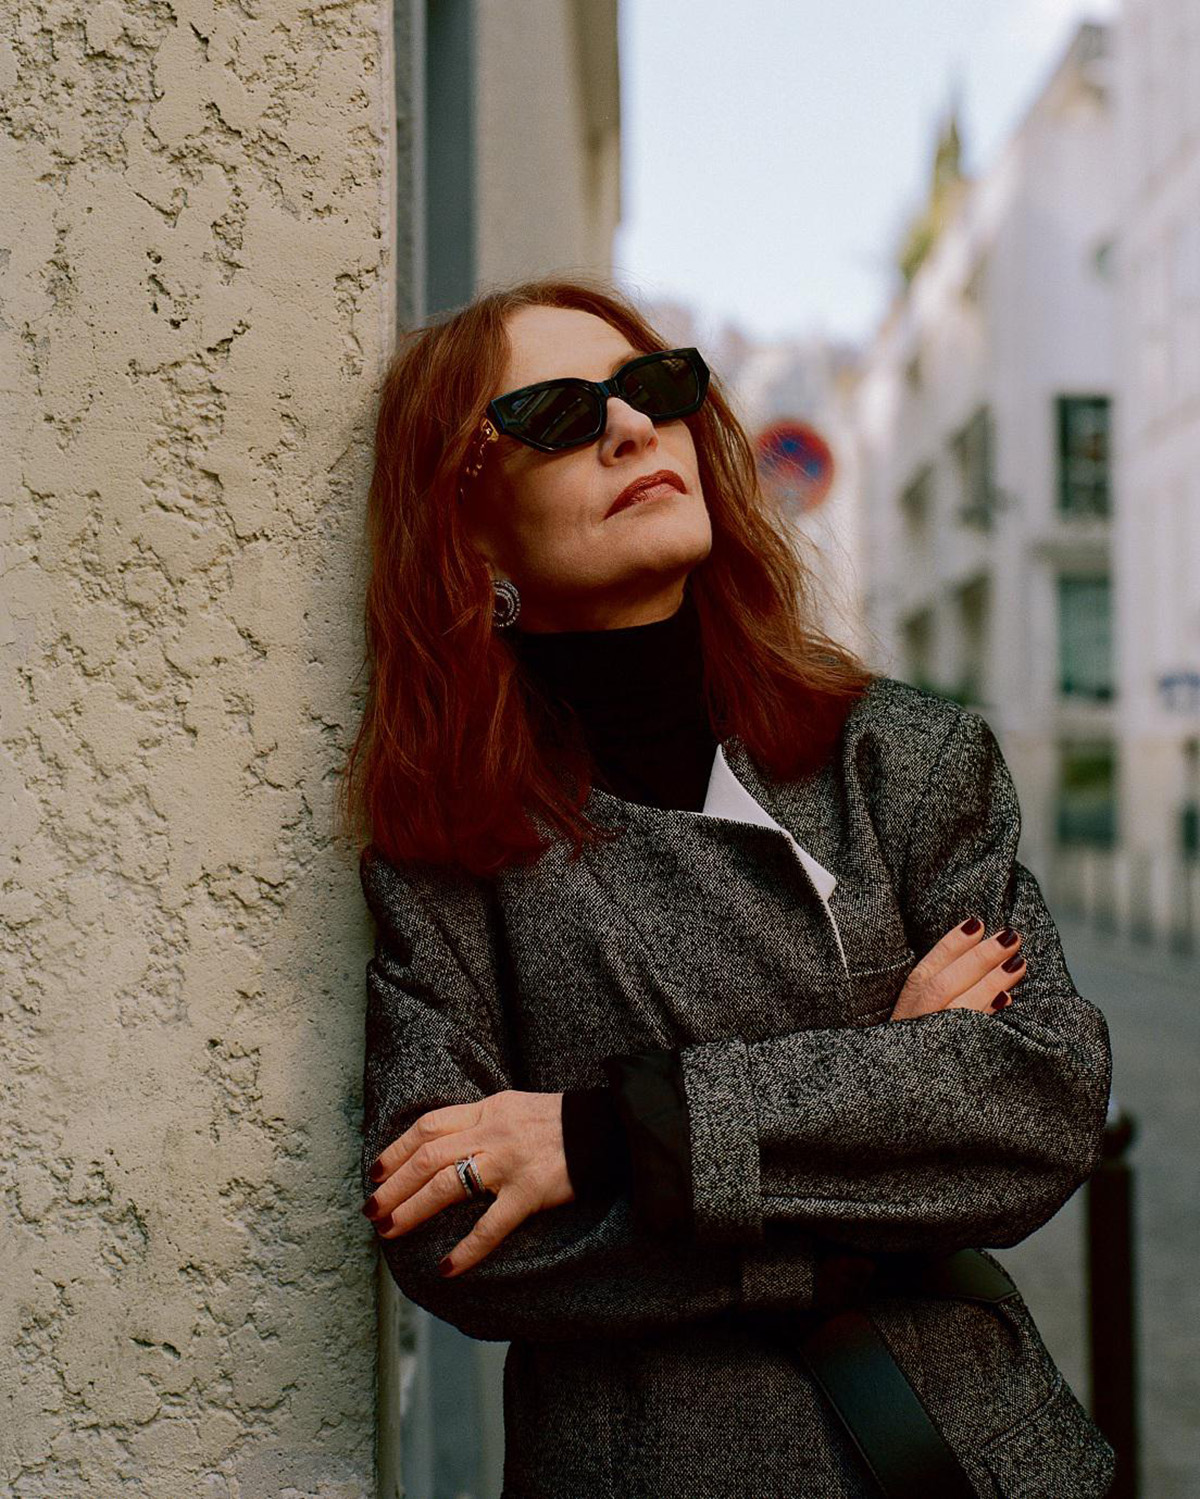 Isabelle Huppert covers How To Spend It September 25th, 2021 by Kuba Ryniewicz